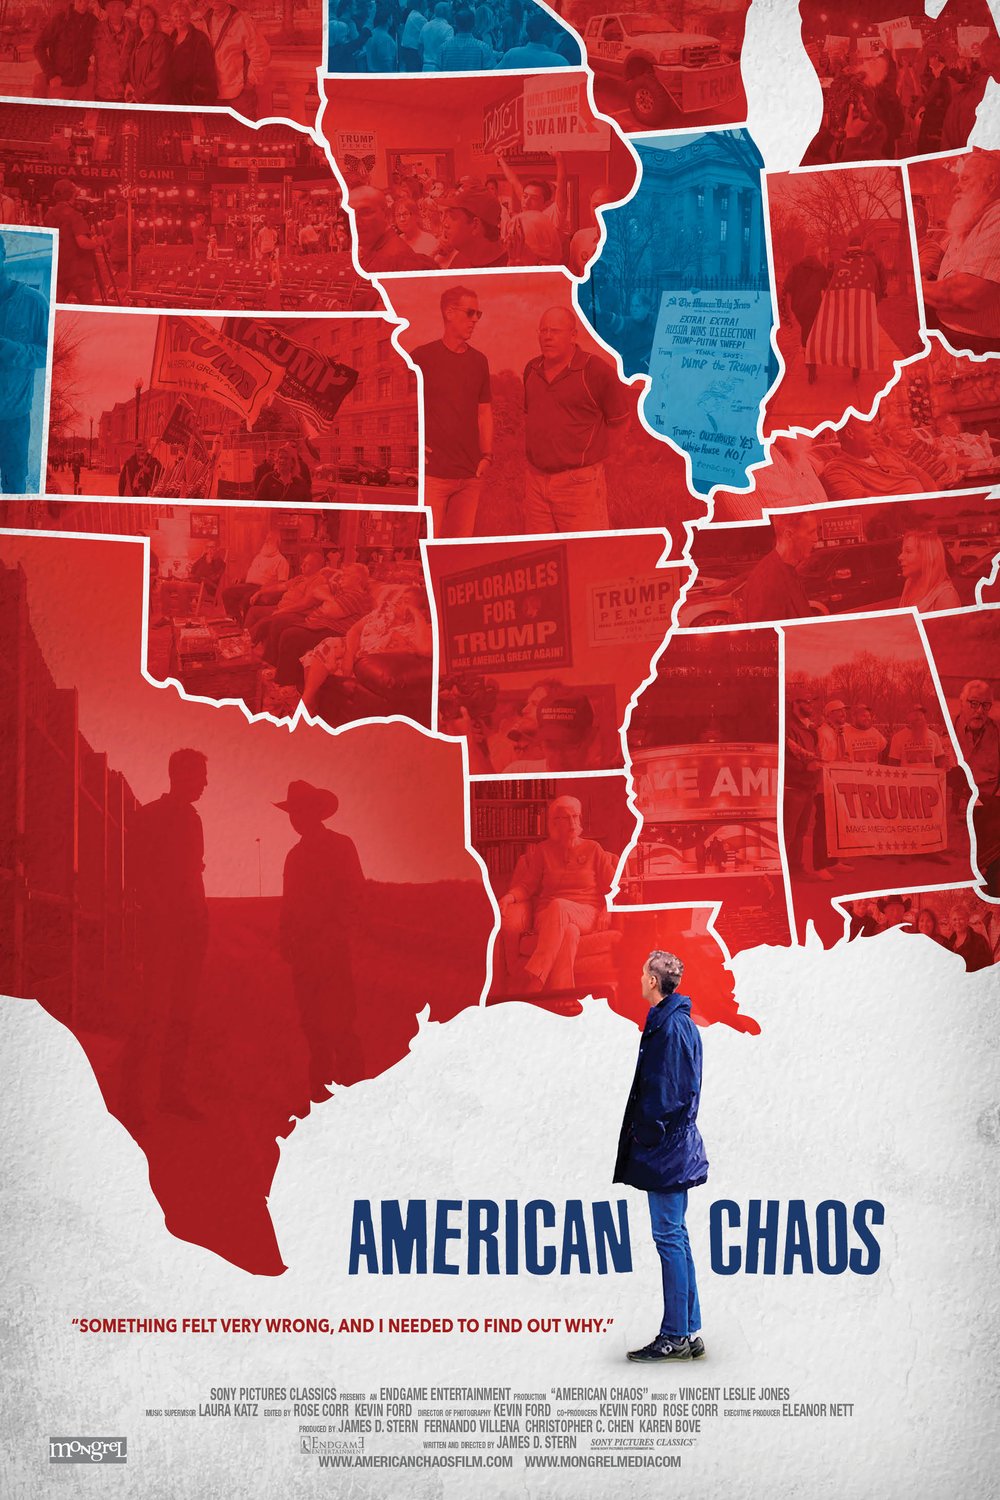 Poster of the movie American Chaos